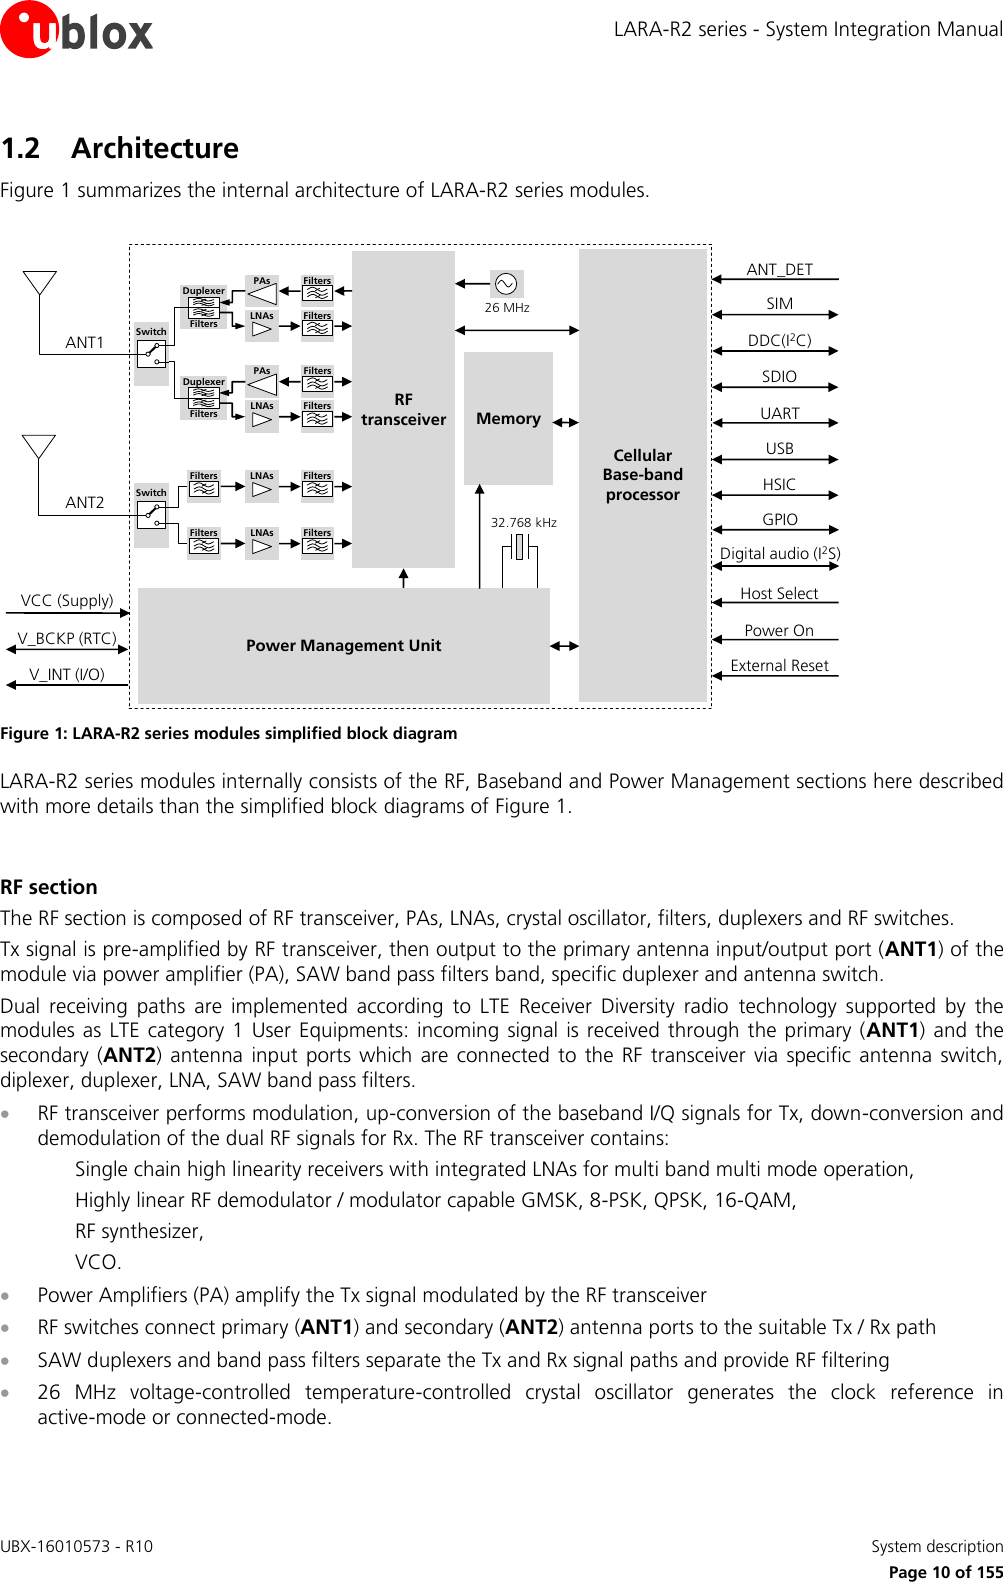 LARA-R2 series - System Integration Manual UBX-16010573 - R10    System description     Page 10 of 155 1.2 Architecture Figure 1 summarizes the internal architecture of LARA-R2 series modules.  CellularBase-bandprocessorMemoryPower Management Unit26 MHz32.768 kHzANT1RF transceiverANT2V_INT (I/O)V_BCKP (RTC)VCC (Supply)SIMUSBHSICPower OnExternal ResetPAsLNAs FiltersFiltersDuplexerFiltersPAsLNAs FiltersFiltersDuplexerFiltersLNAs FiltersFiltersLNAs FiltersFiltersSwitchSwitchDDC(I2C)SDIOUARTANT_DETHost SelectGPIODigital audio (I2S) Figure 1: LARA-R2 series modules simplified block diagram LARA-R2 series modules internally consists of the RF, Baseband and Power Management sections here described with more details than the simplified block diagrams of Figure 1.  RF section The RF section is composed of RF transceiver, PAs, LNAs, crystal oscillator, filters, duplexers and RF switches. Tx signal is pre-amplified by RF transceiver, then output to the primary antenna input/output port (ANT1) of the module via power amplifier (PA), SAW band pass filters band, specific duplexer and antenna switch. Dual  receiving  paths  are  implemented  according  to  LTE  Receiver  Diversity  radio  technology  supported  by  the modules as  LTE category  1 User Equipments:  incoming  signal is received through the  primary (ANT1)  and the secondary  (ANT2)  antenna  input ports  which  are  connected to  the RF  transceiver  via specific antenna switch, diplexer, duplexer, LNA, SAW band pass filters.   RF transceiver performs modulation, up-conversion of the baseband I/Q signals for Tx, down-conversion and demodulation of the dual RF signals for Rx. The RF transceiver contains: Single chain high linearity receivers with integrated LNAs for multi band multi mode operation, Highly linear RF demodulator / modulator capable GMSK, 8-PSK, QPSK, 16-QAM,  RF synthesizer, VCO.  Power Amplifiers (PA) amplify the Tx signal modulated by the RF transceiver   RF switches connect primary (ANT1) and secondary (ANT2) antenna ports to the suitable Tx / Rx path  SAW duplexers and band pass filters separate the Tx and Rx signal paths and provide RF filtering  26  MHz  voltage-controlled  temperature-controlled  crystal  oscillator  generates  the  clock  reference  in active-mode or connected-mode.  